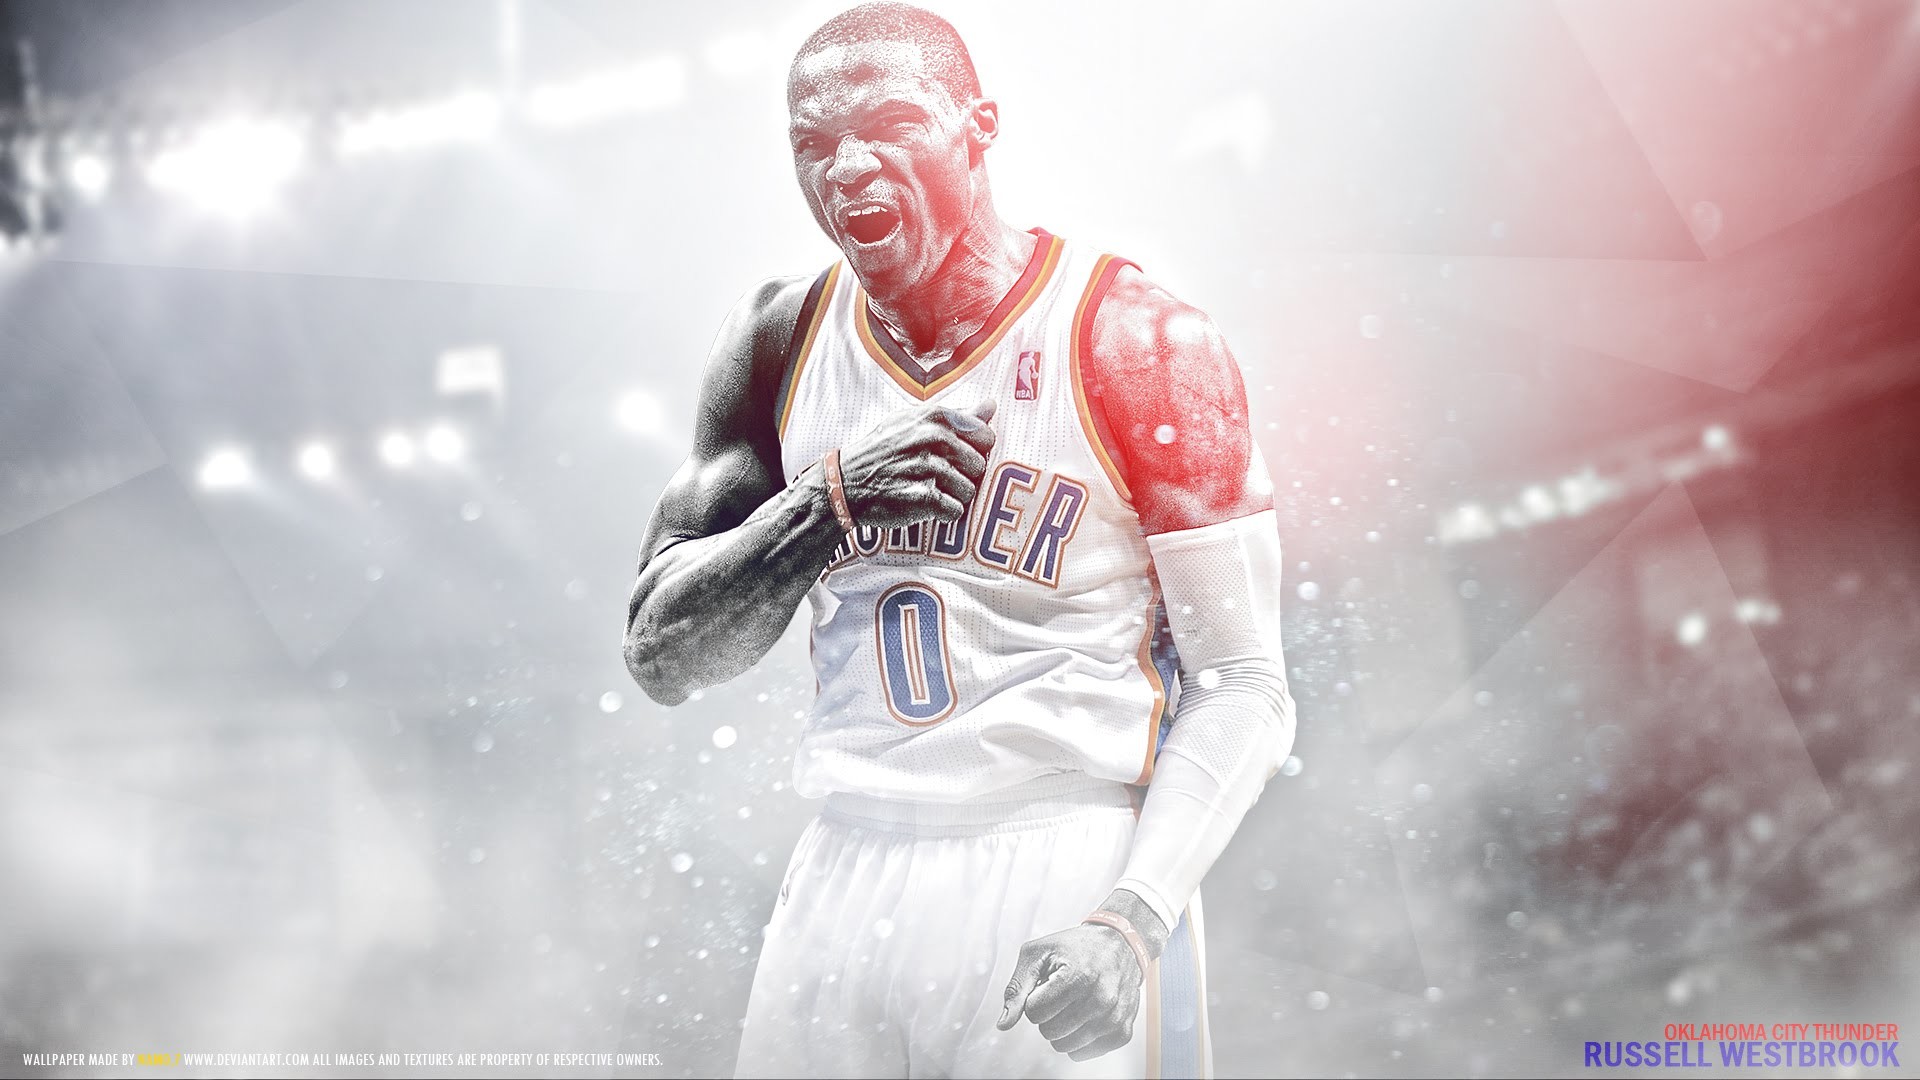 1920x1080 Russell Westbrook HD Images 5 | Russell Westbrook HD Images | Pinterest |  Russell westbrook, Hd images and Nba players